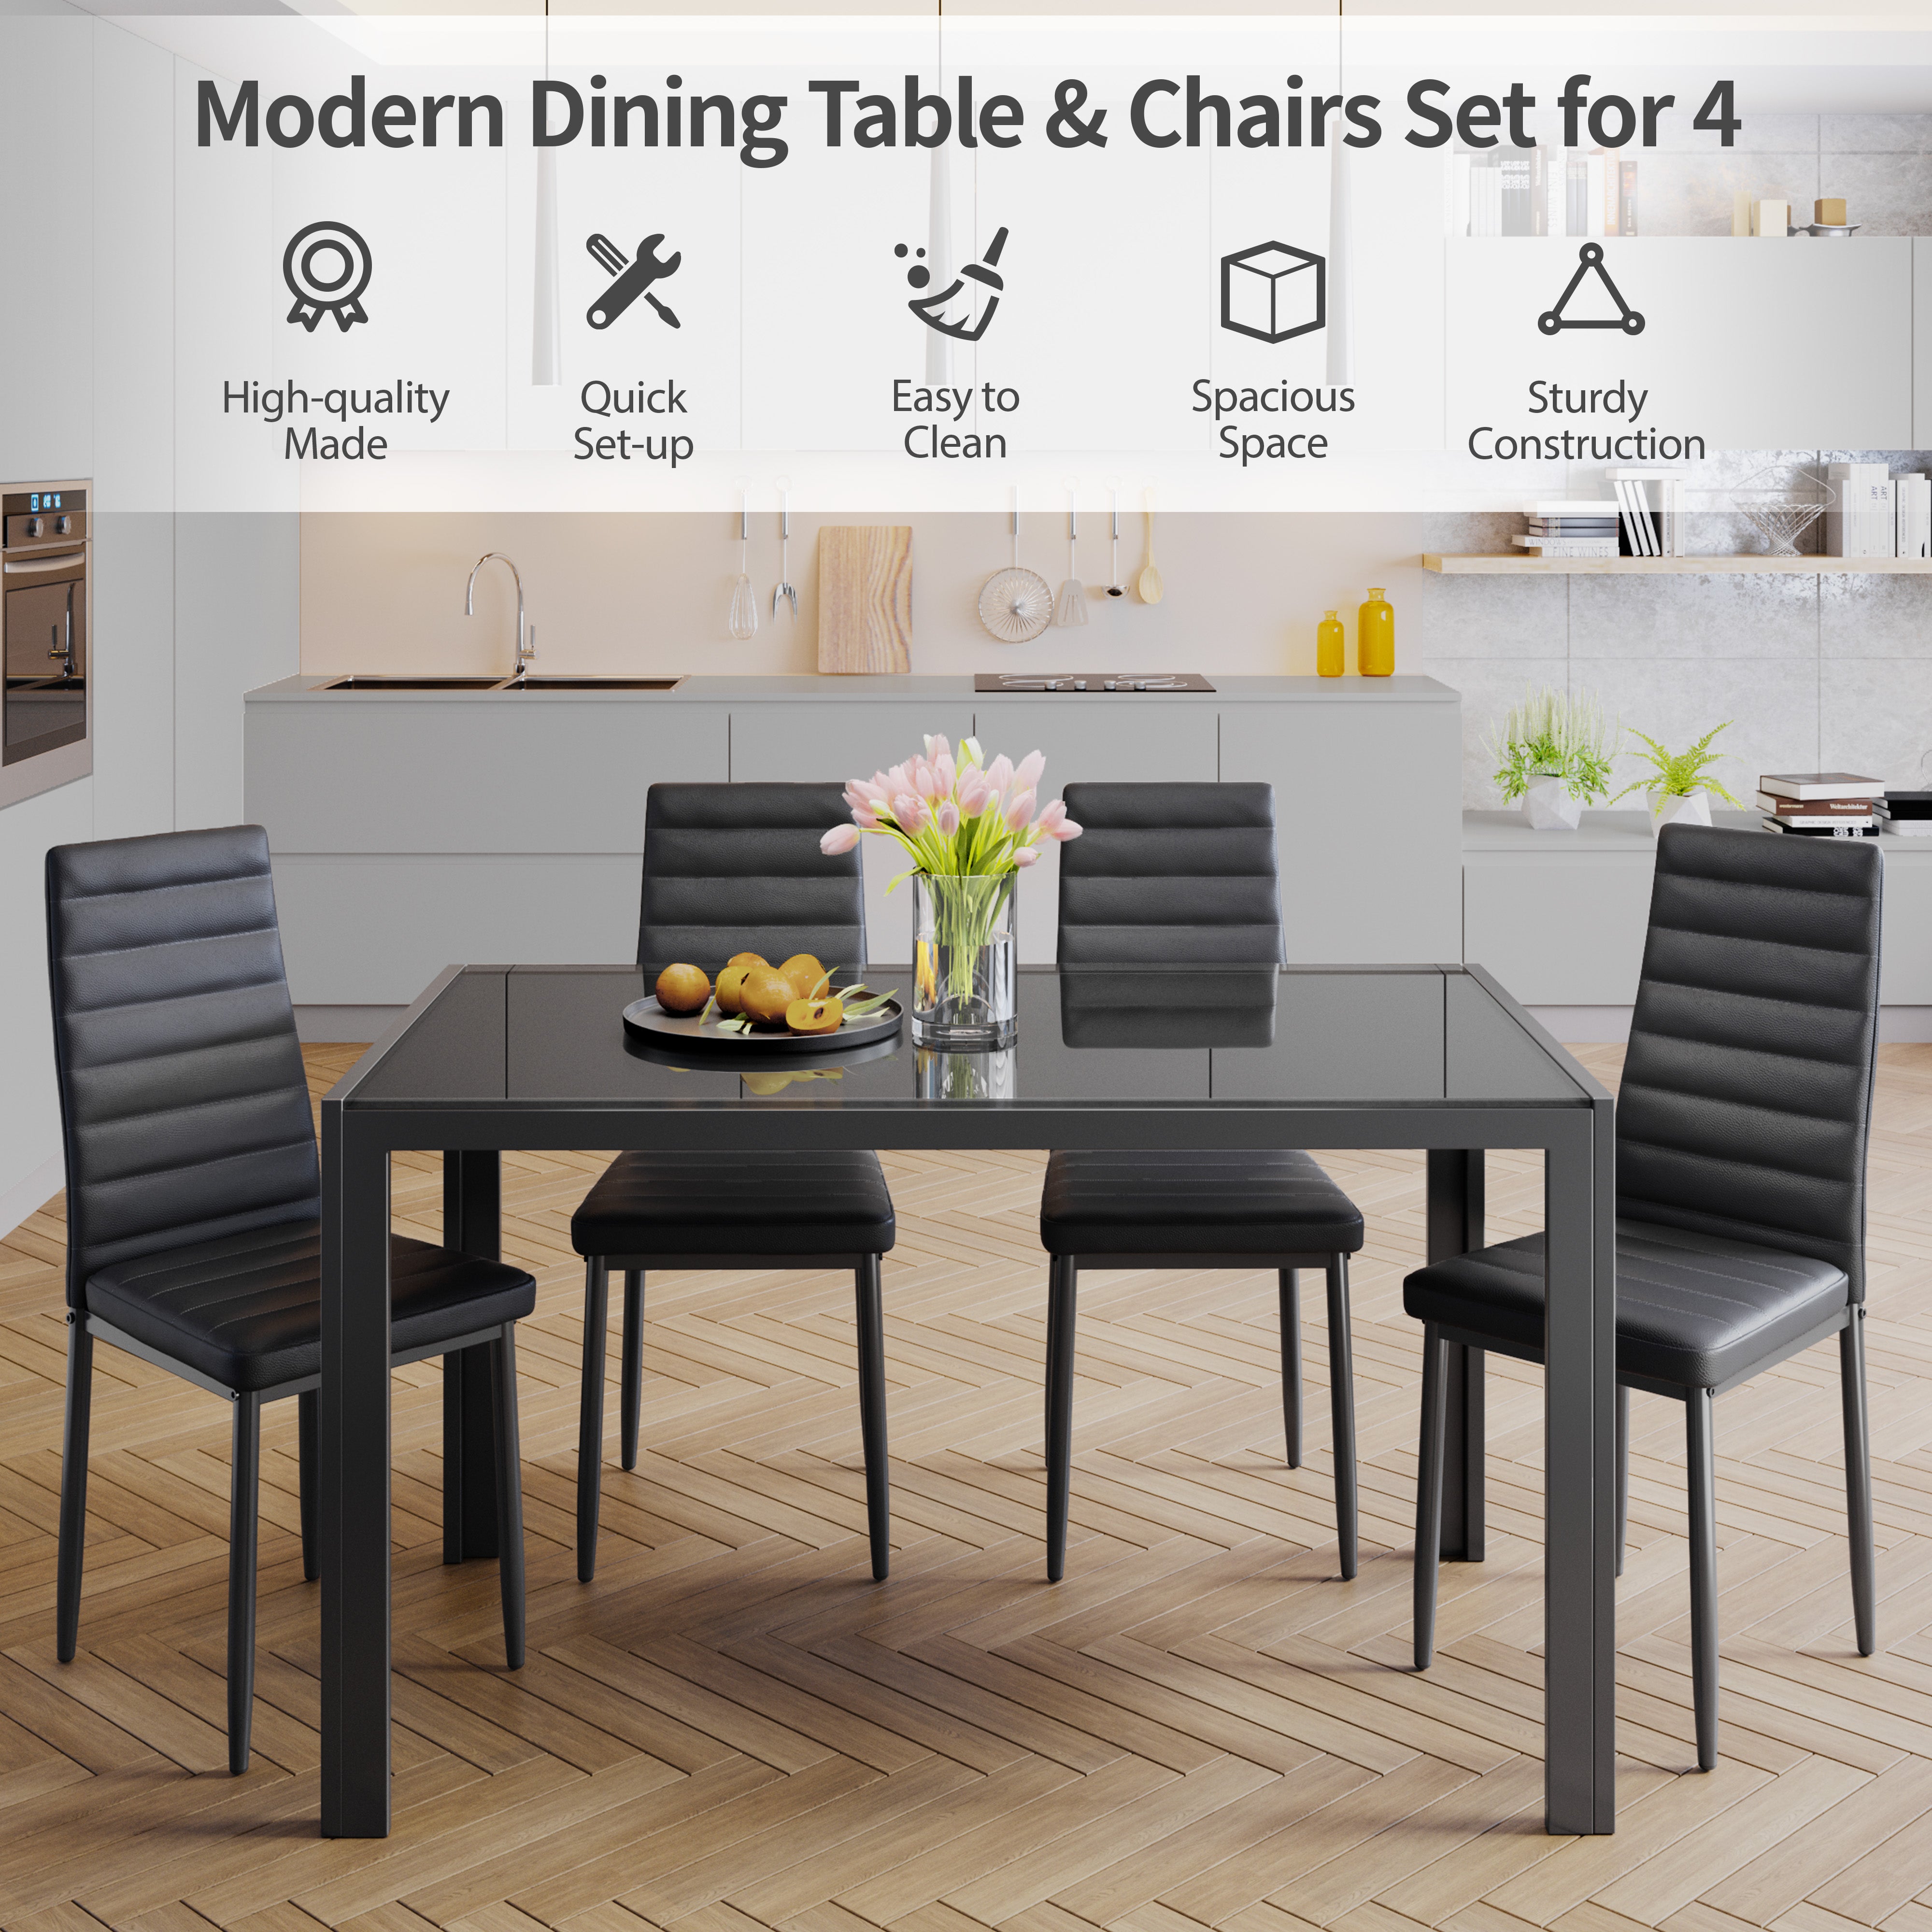 Gizoon TB40 5 Piece Glass Dining Table Set For 4, Leather Modern Room Sets Home